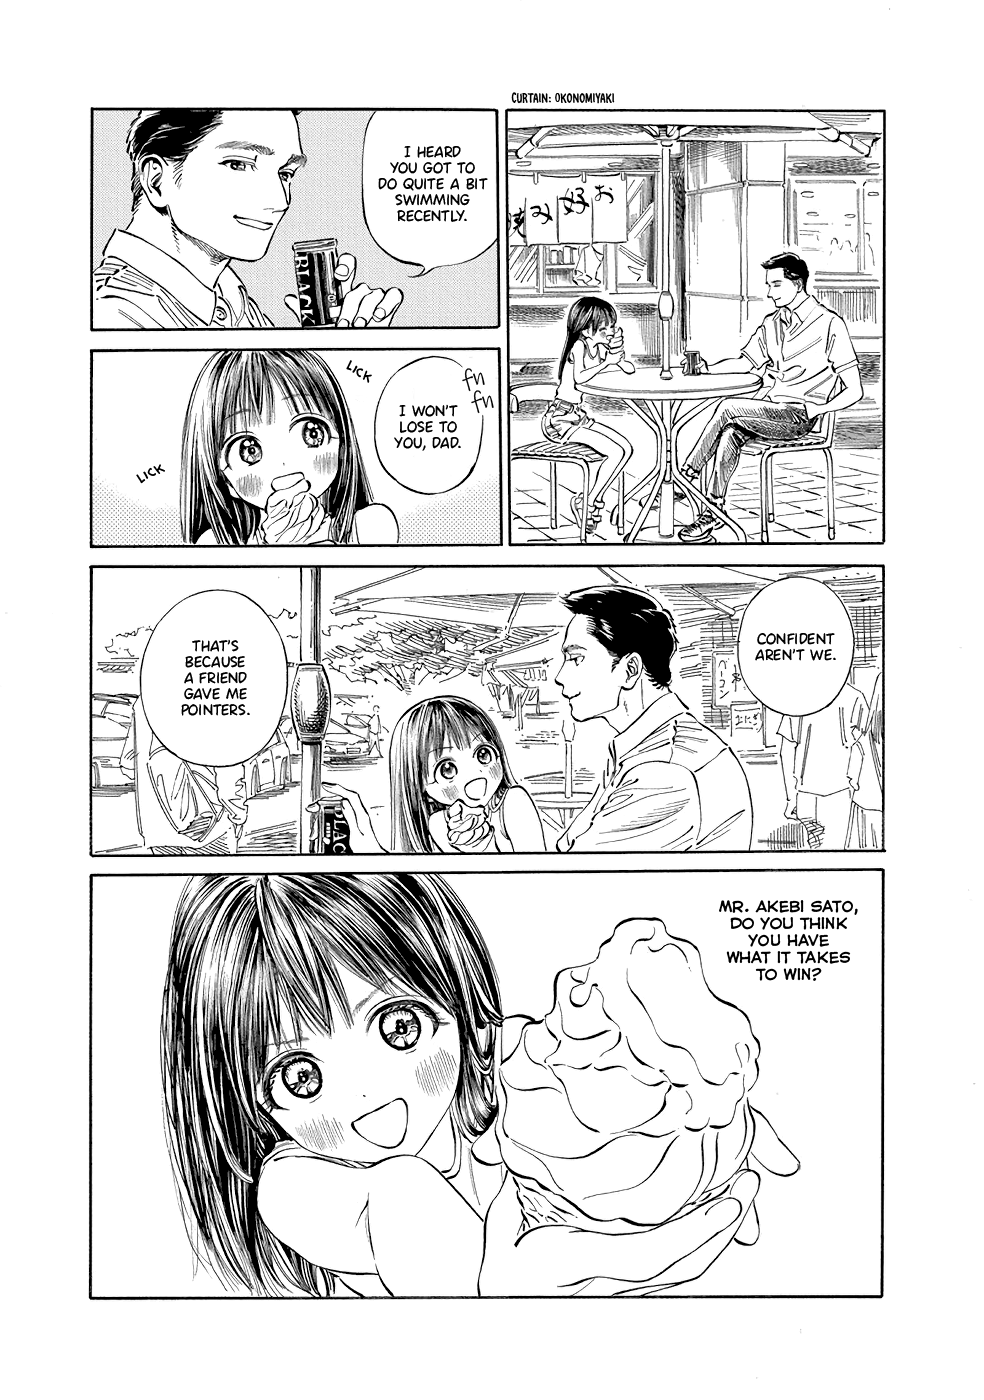 Akebi-Chan No Sailor Fuku Vol.5 Chapter 31: Do You Have What It Takes? - Picture 3